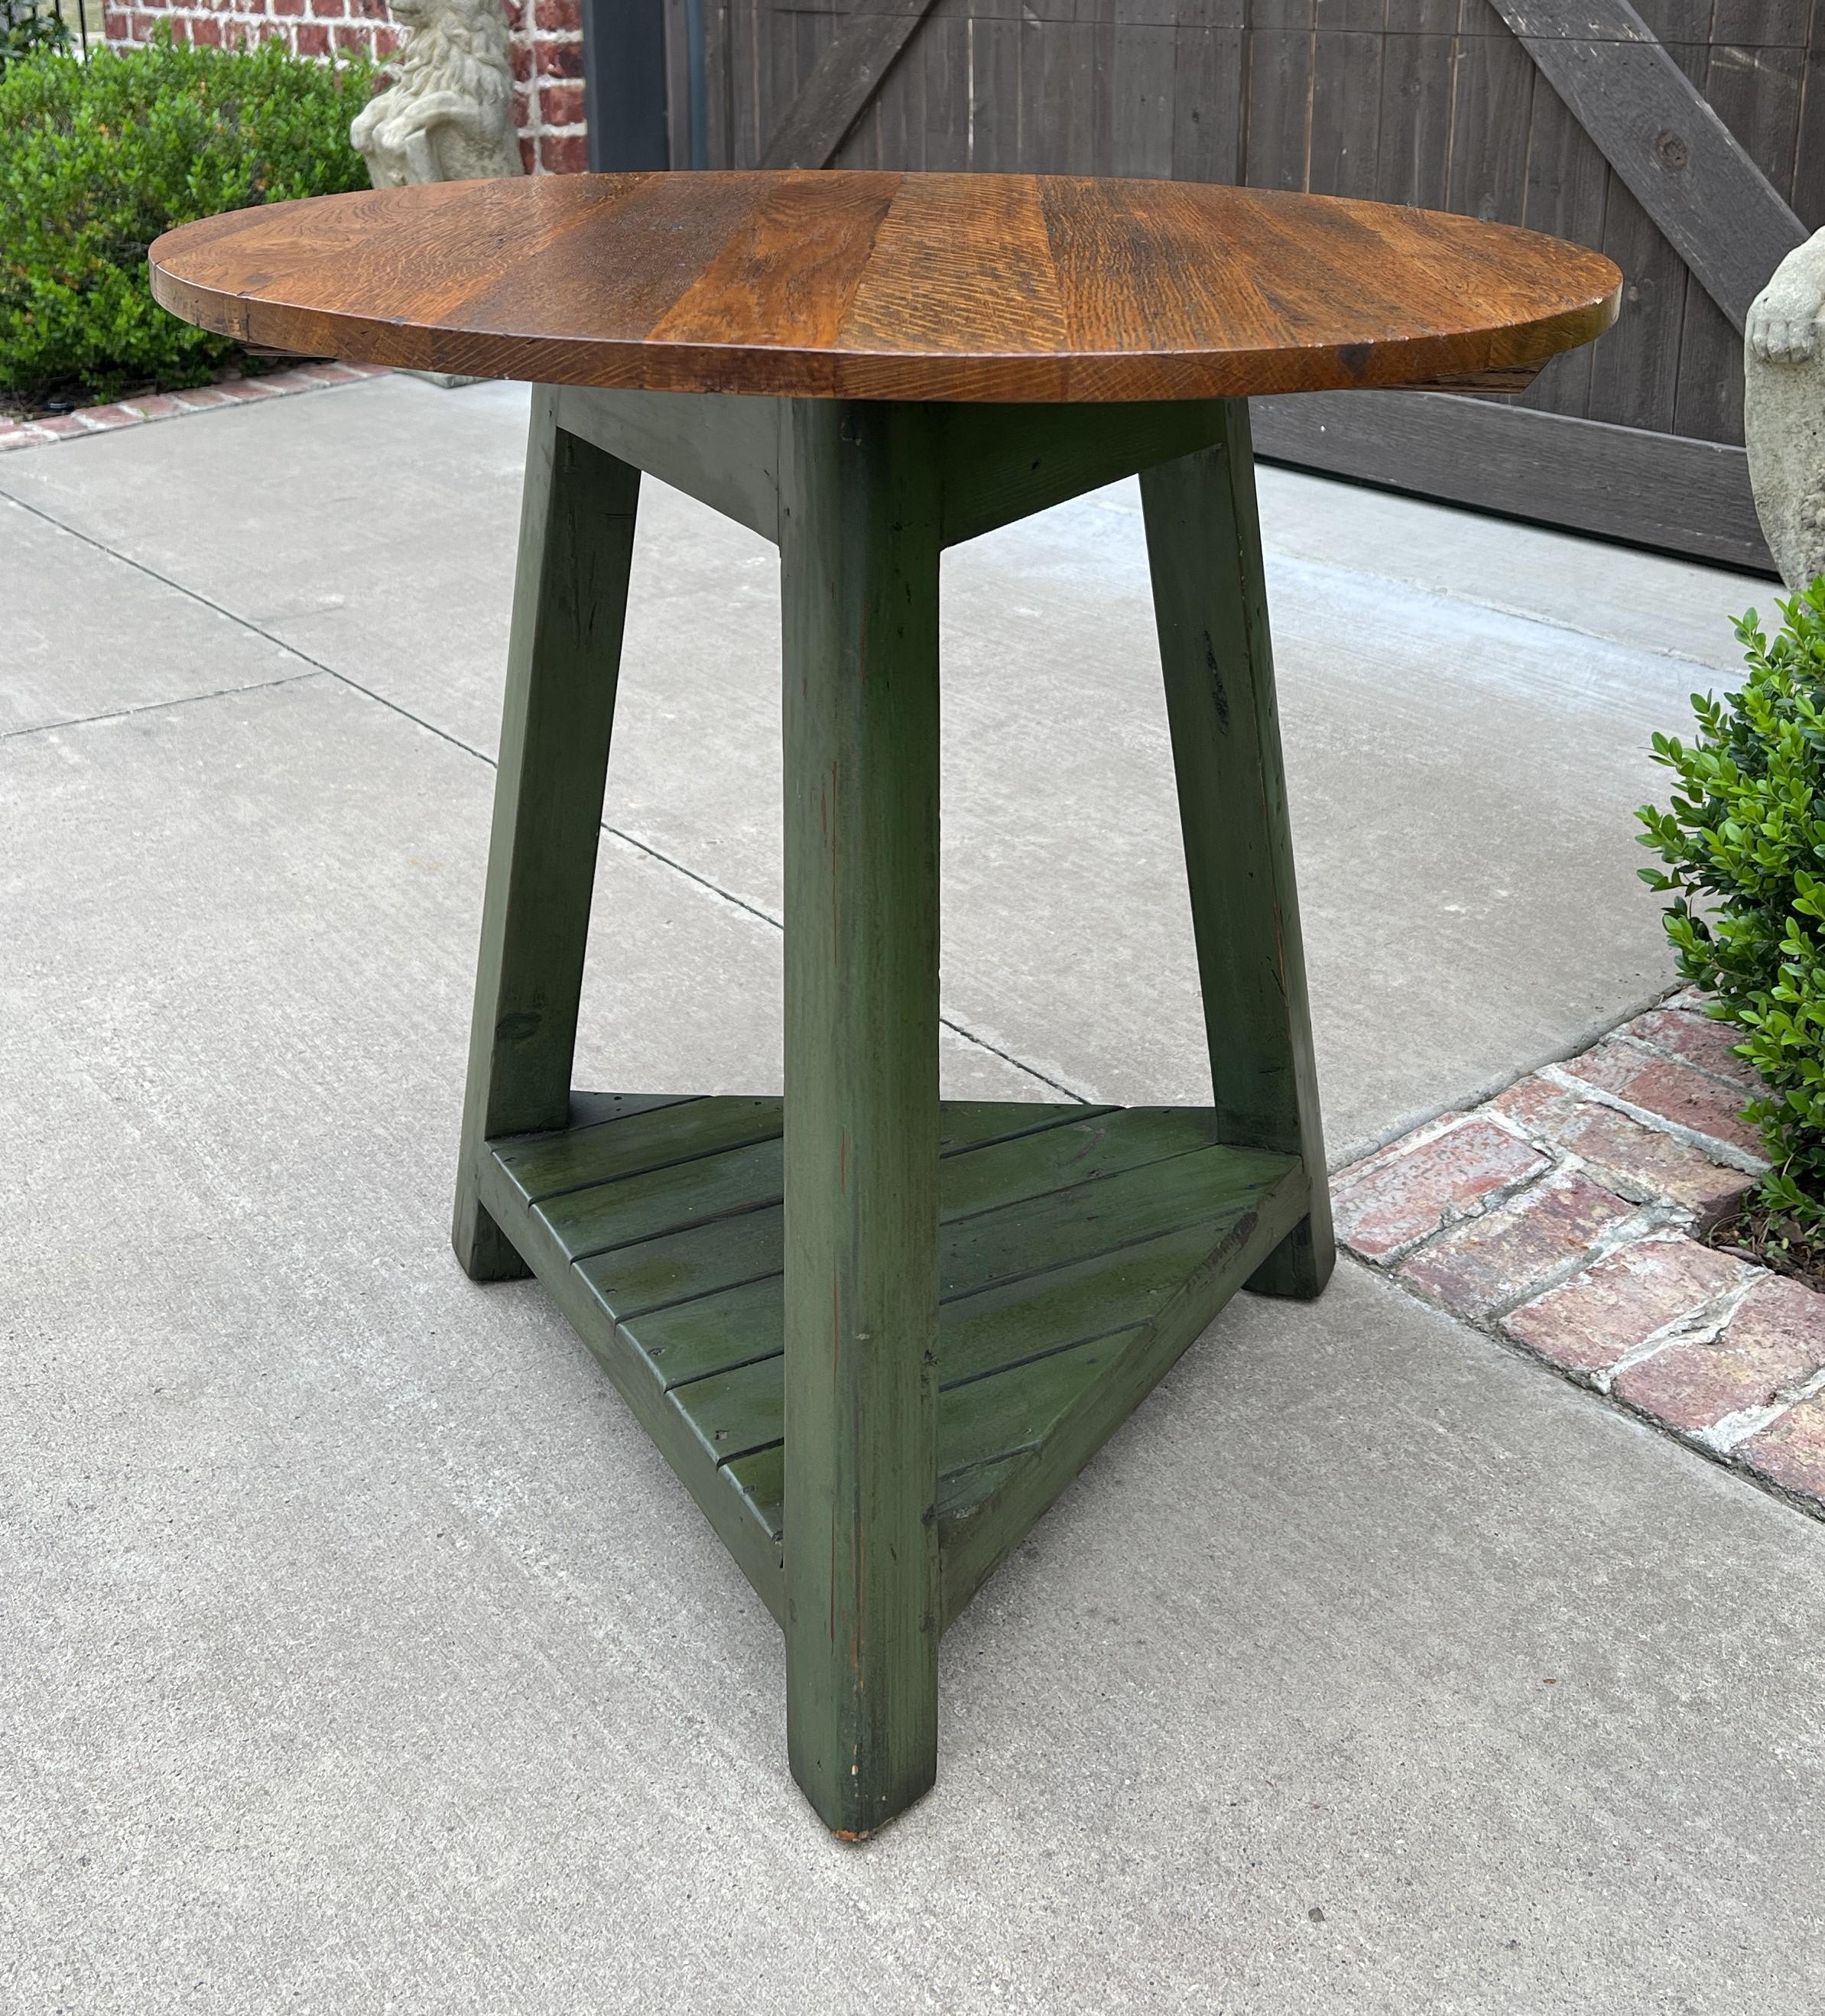 British Vintage English Round Cricket Table End Table Side Table Oak 3-Legged Green Base For Sale